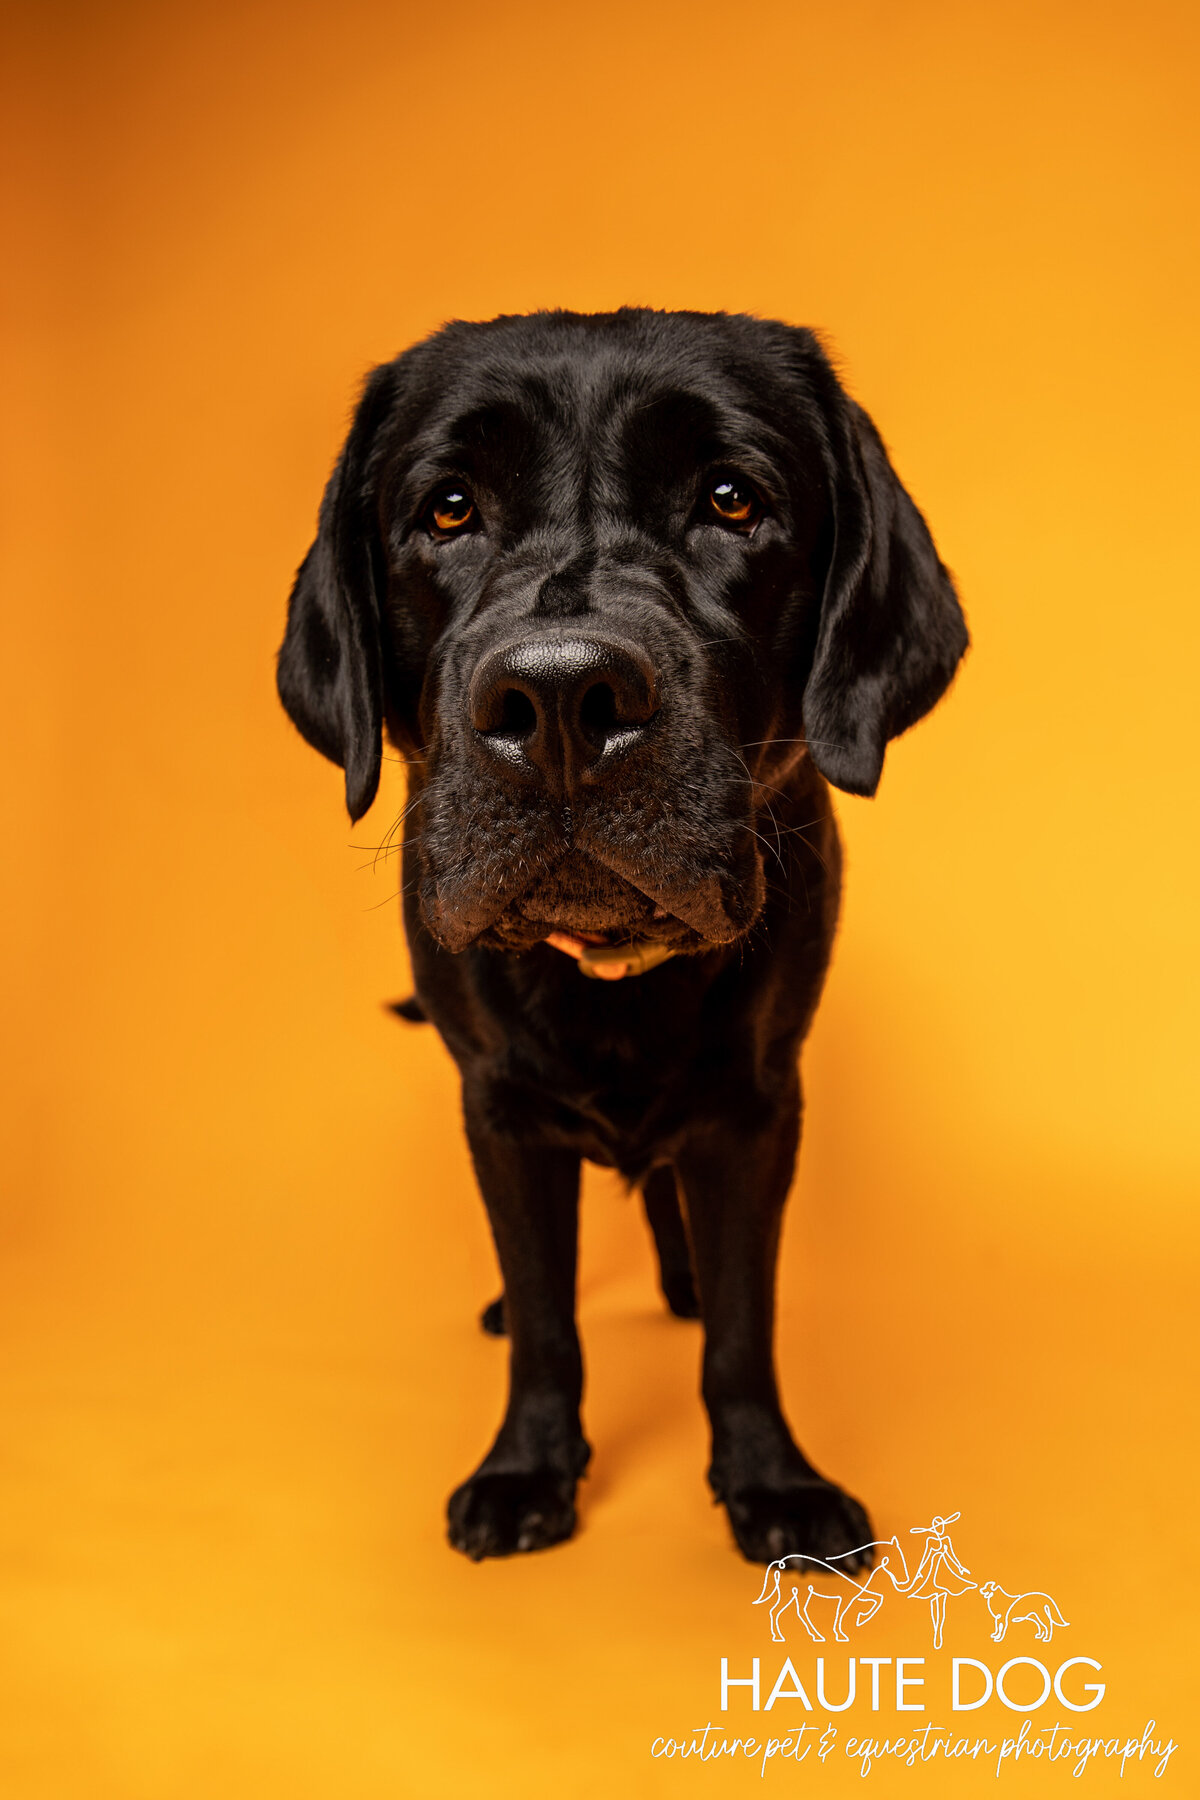 Portrait of a black Labrador standing on a yellow background with a serious expression.